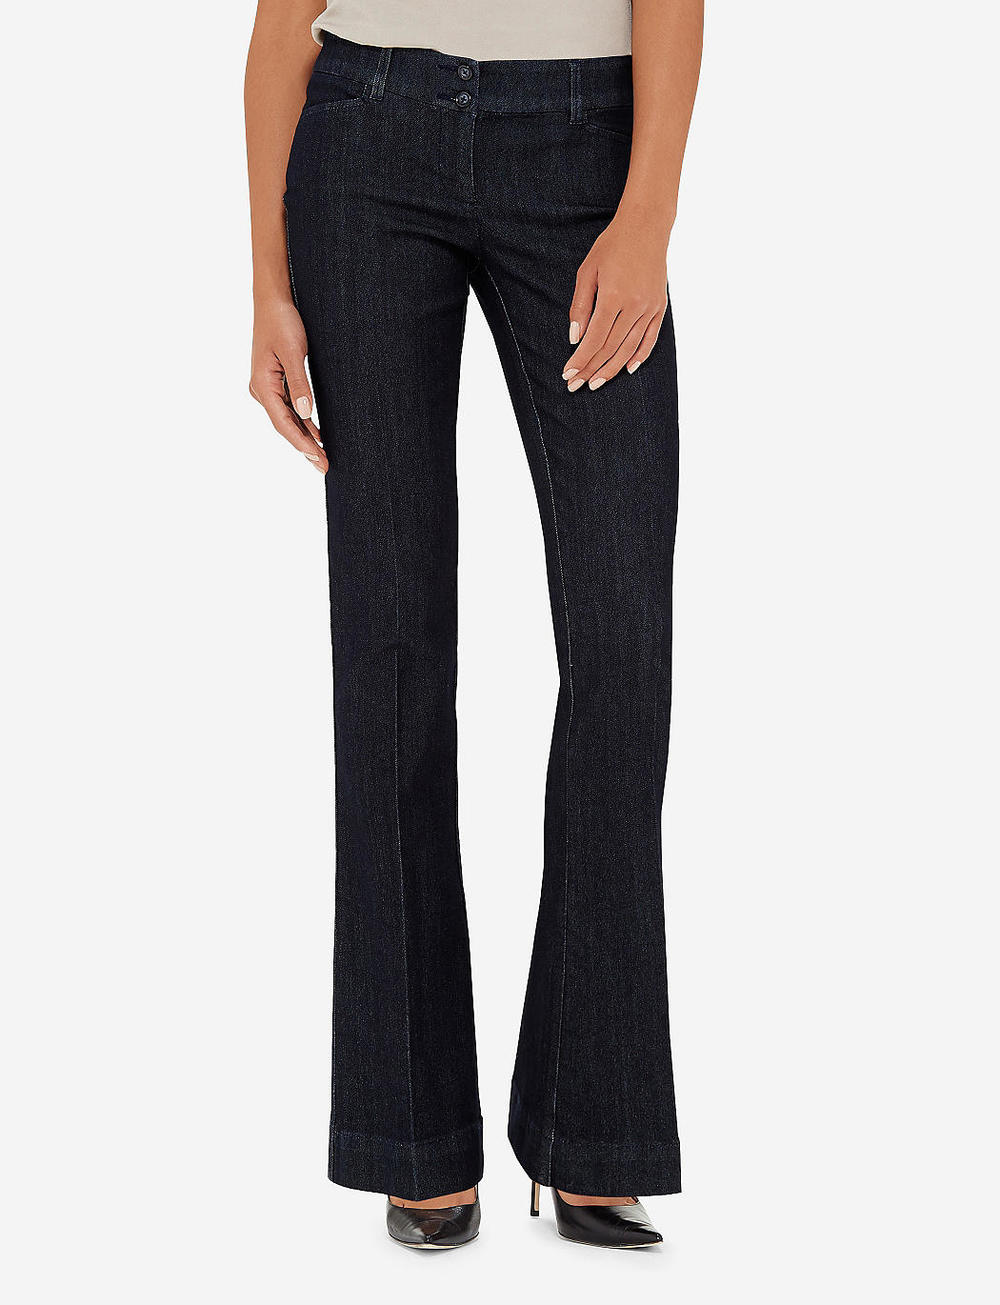  678 Fit & Flare Jeans. The Limited. Was: $79 Now: $39.  